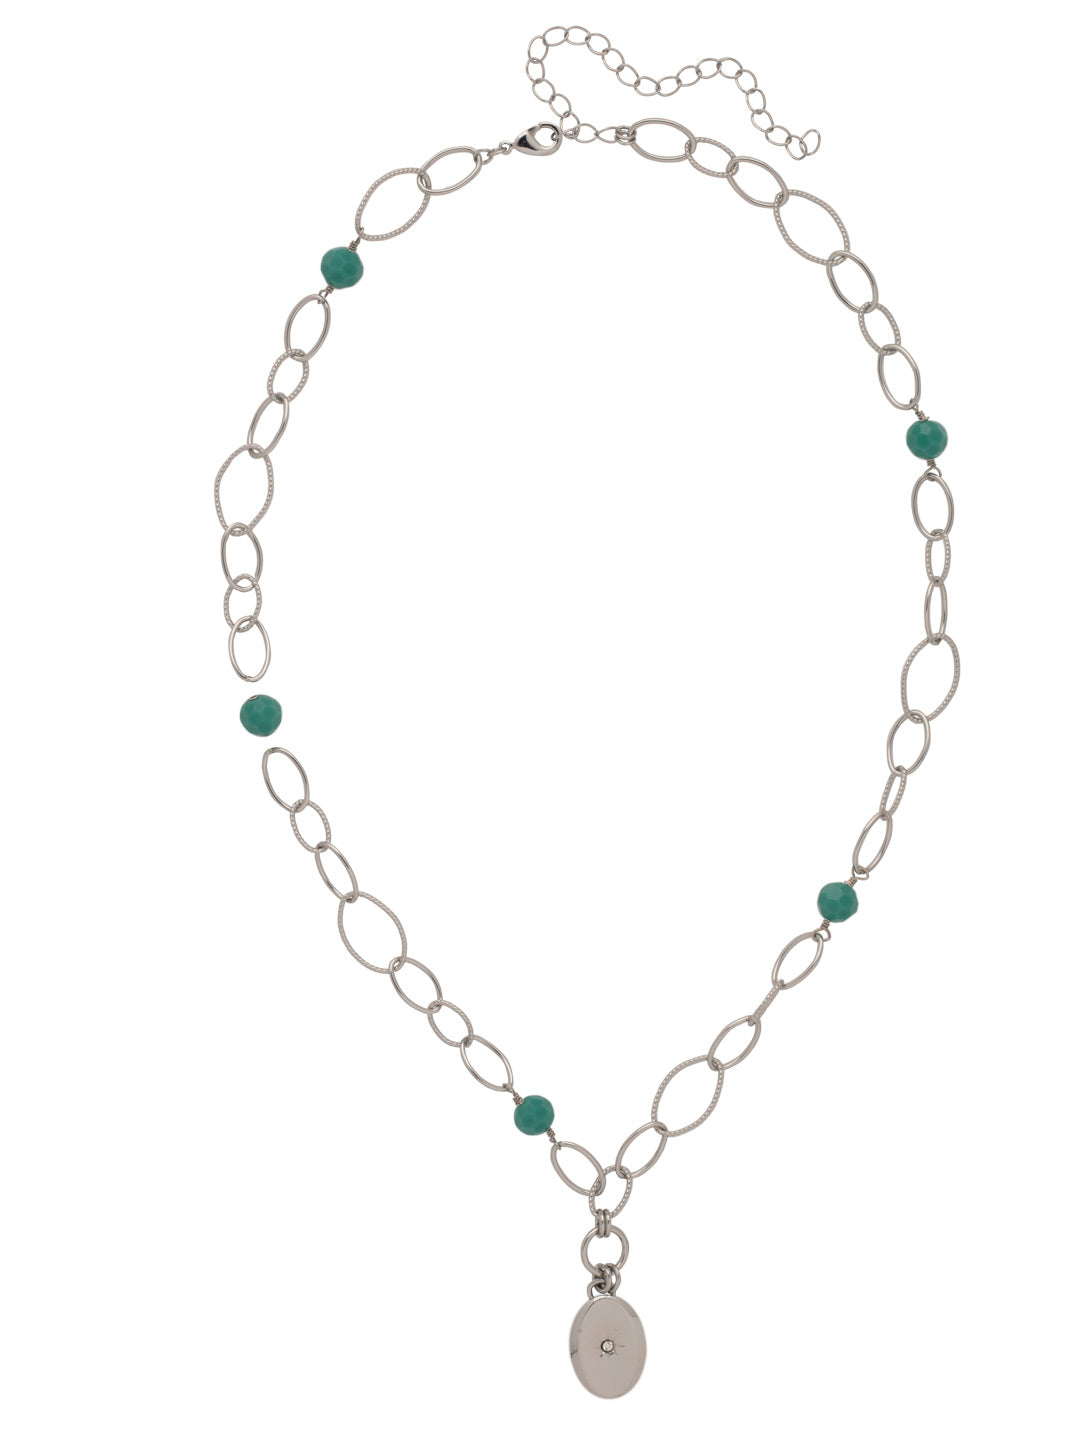 Henley Pendant Necklace - 4NFF80PDTQ - <p>The Henley Pendant Necklace features various chain loops and beads with a star stamped metal pendant on an adjustable chain, secured with a lobster claw clasp. From Sorrelli's Turquoise collection in our Palladium finish.</p>